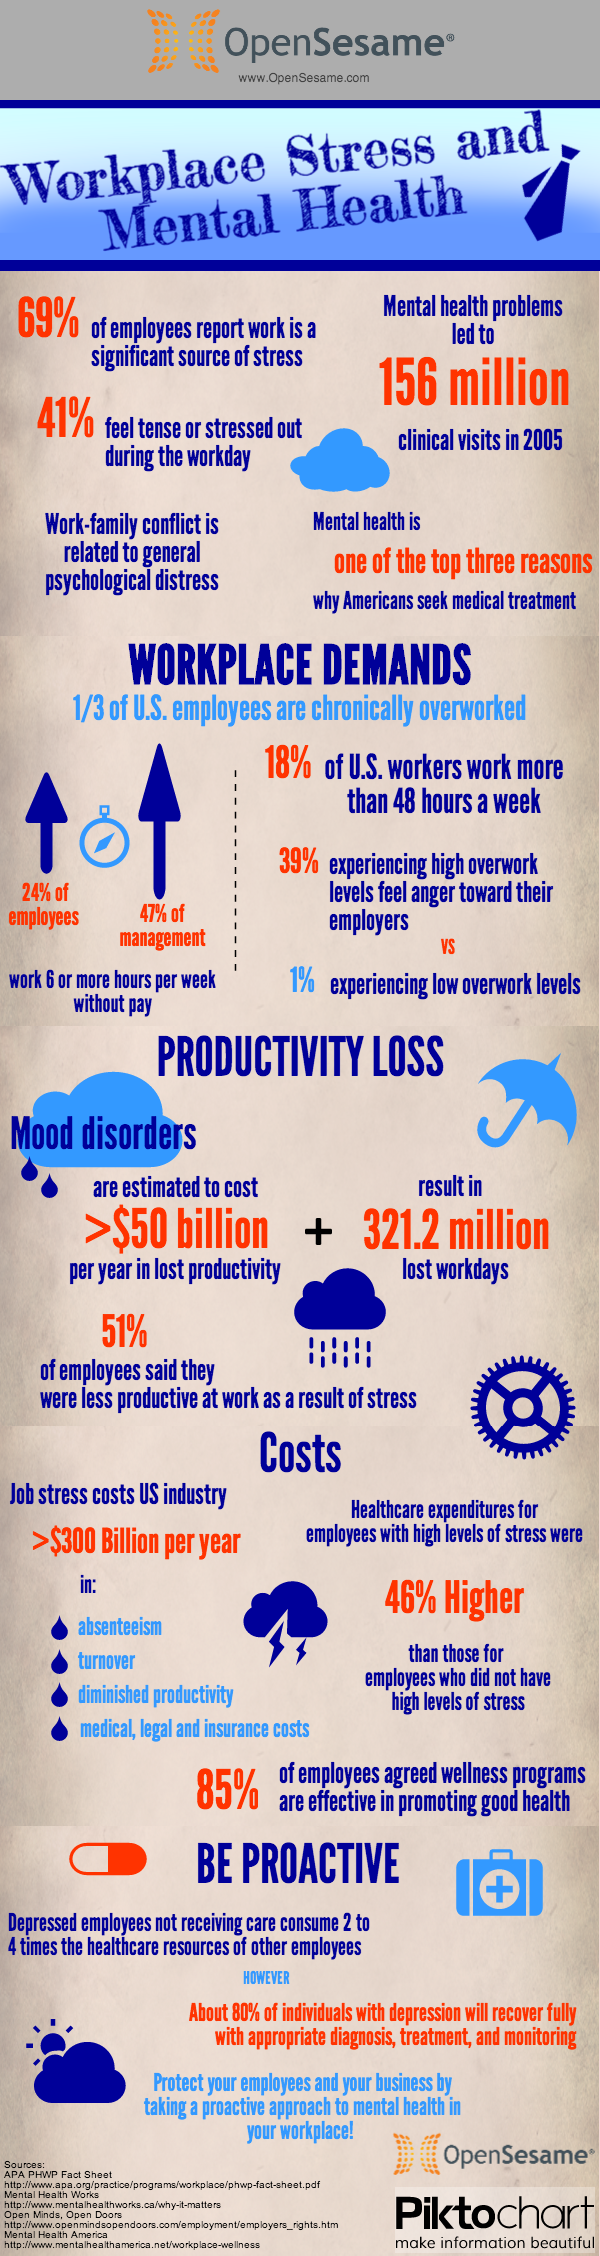 Workplace Stress and Mental Health Infographic